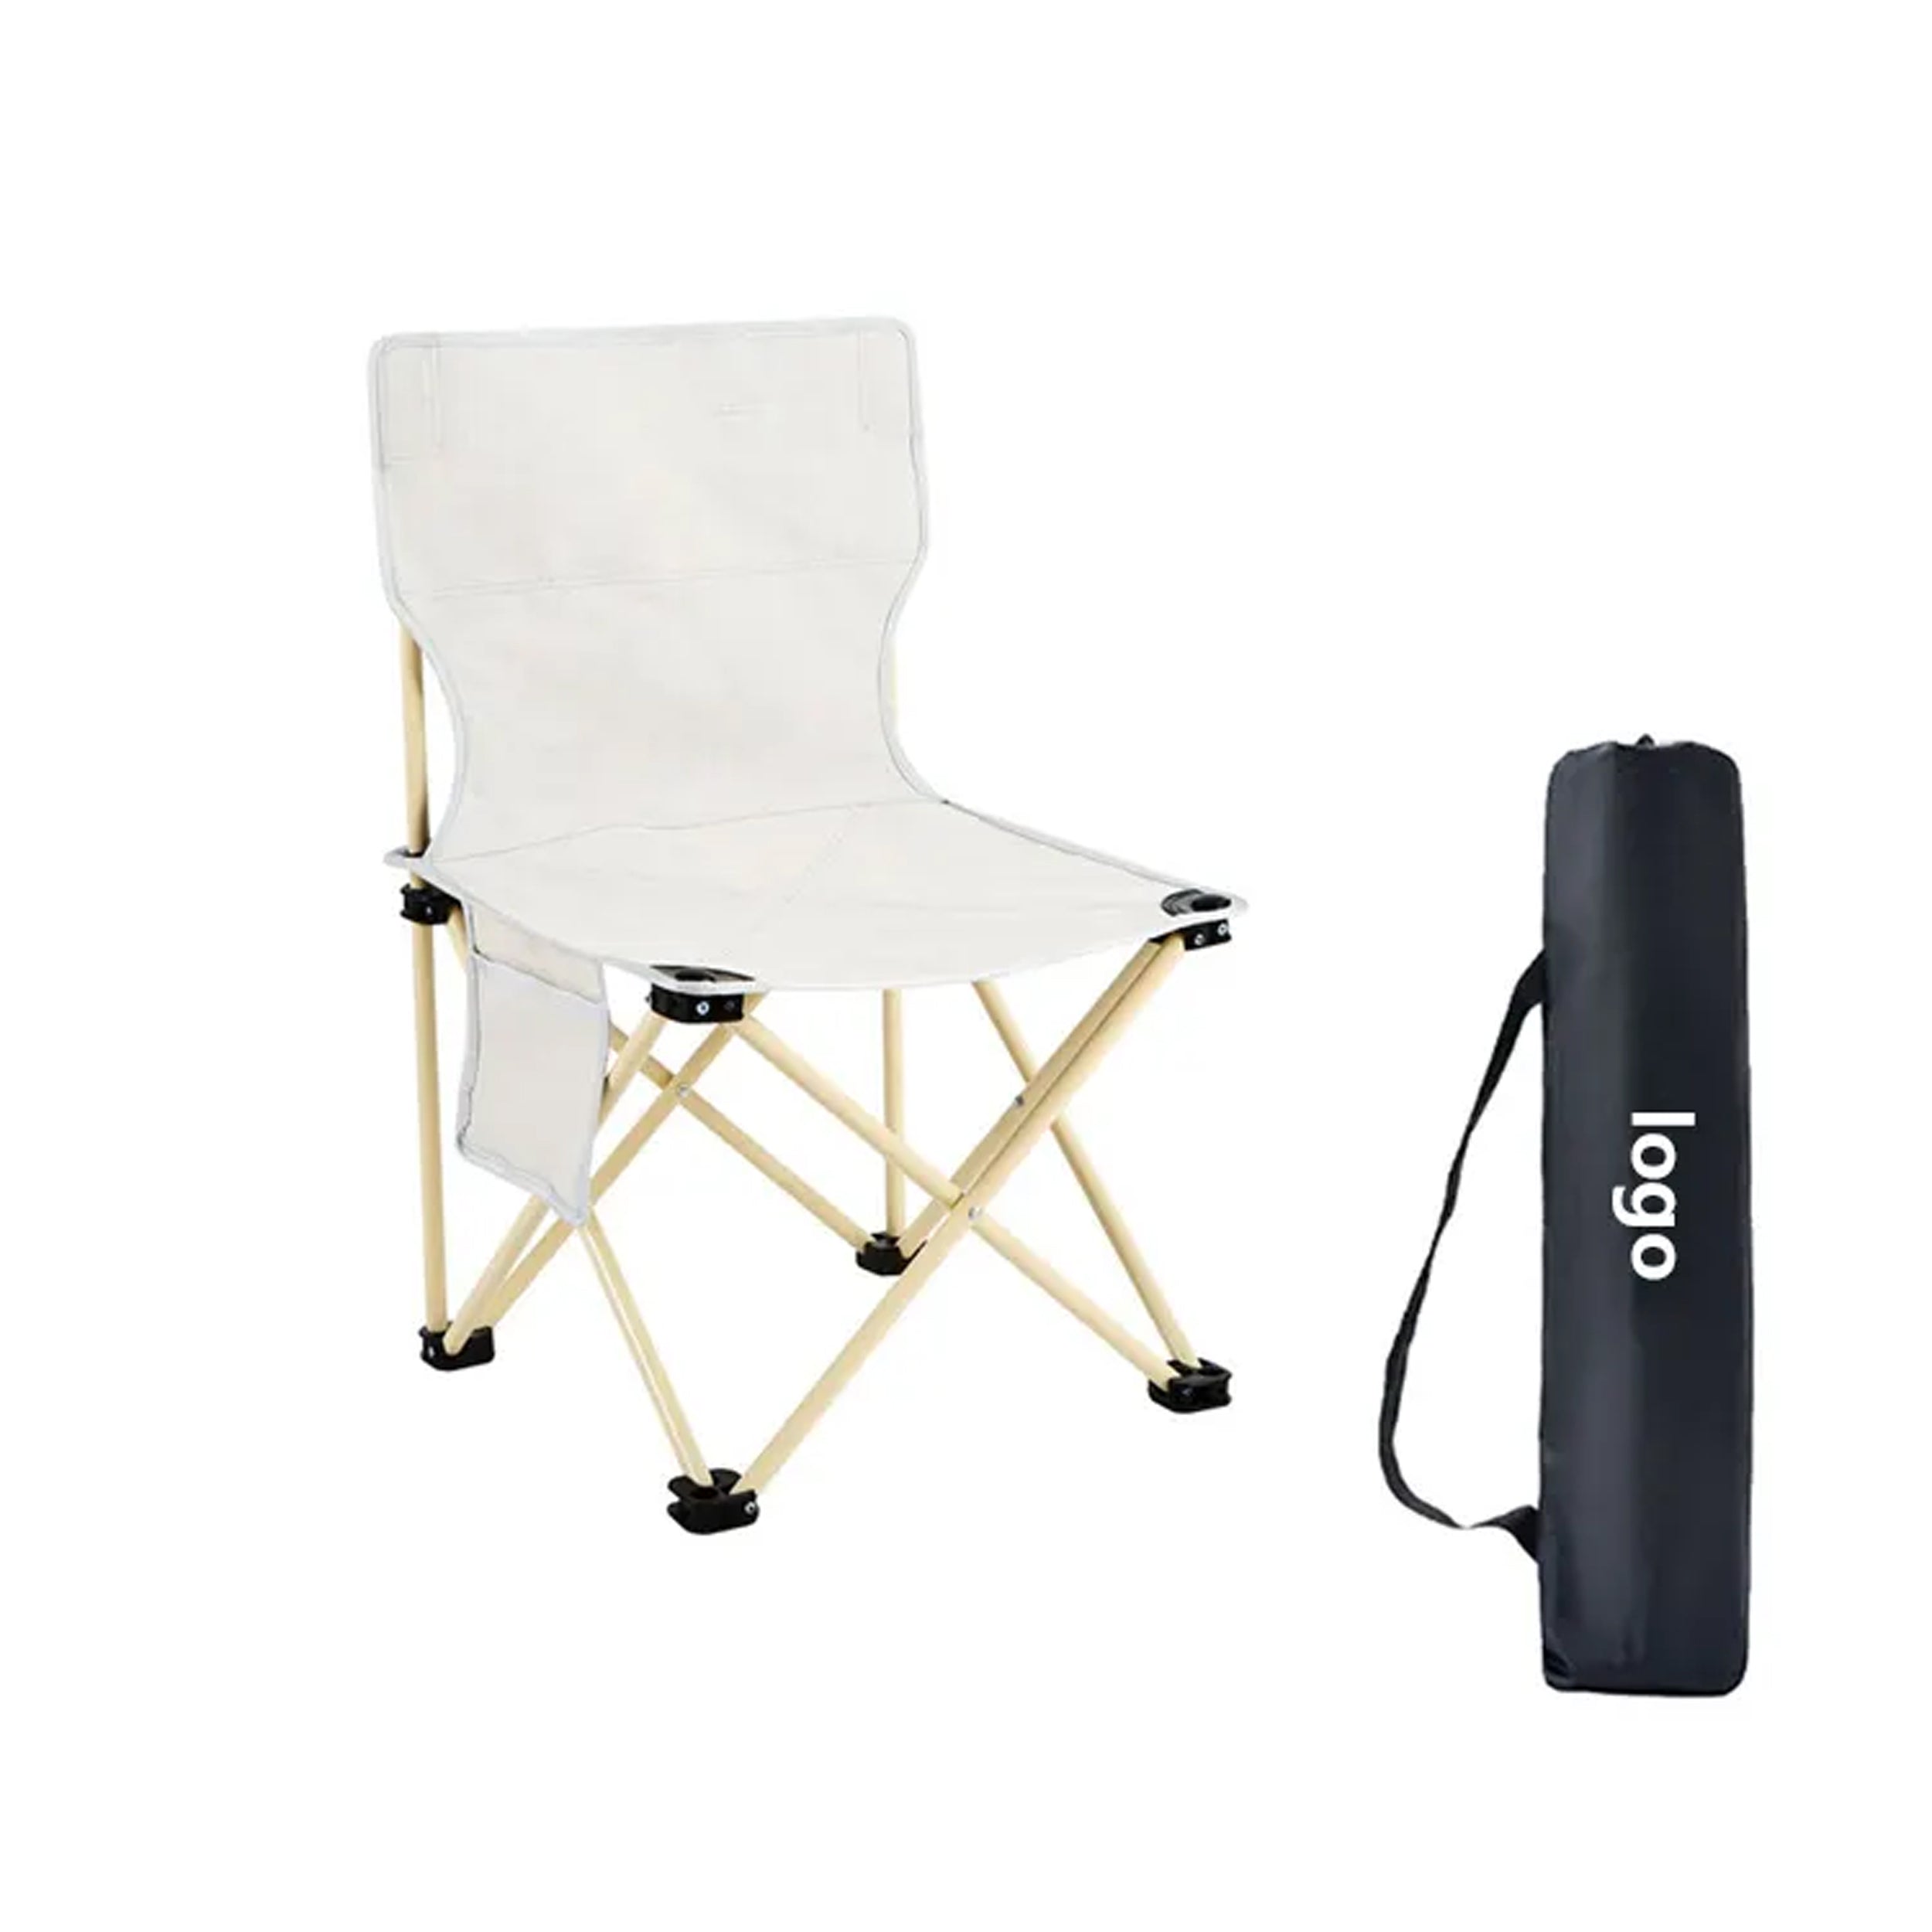 Waterproof Portable Outdoor Chair for Fishing, Camping, Beach